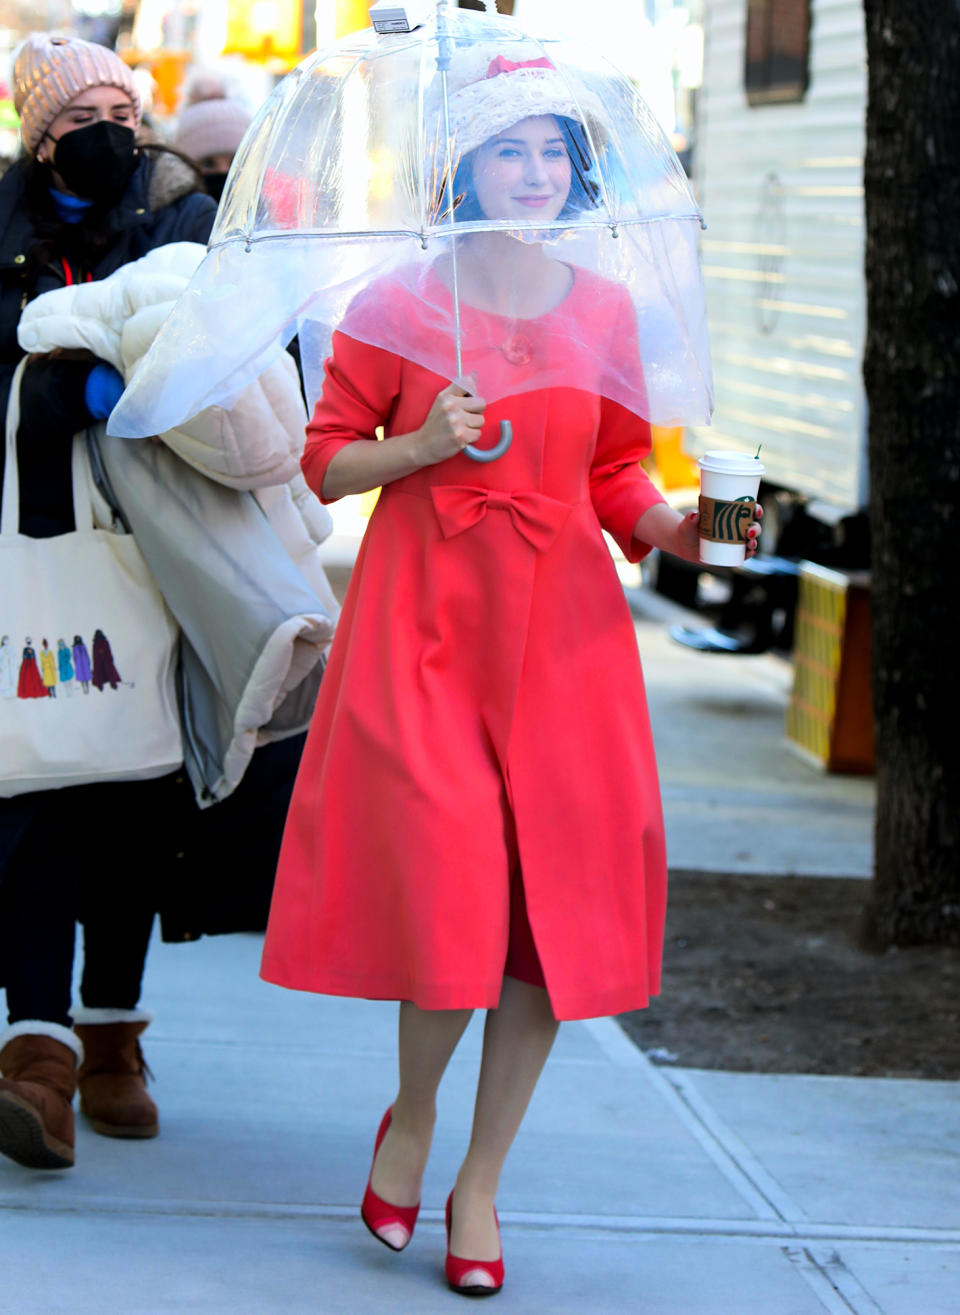 <p>Rachel Brosnahan is dressed in full character on the set of <em>The Marvelous Mrs. Maisel</em> on Tuesday in downtown N.Y.C.</p>